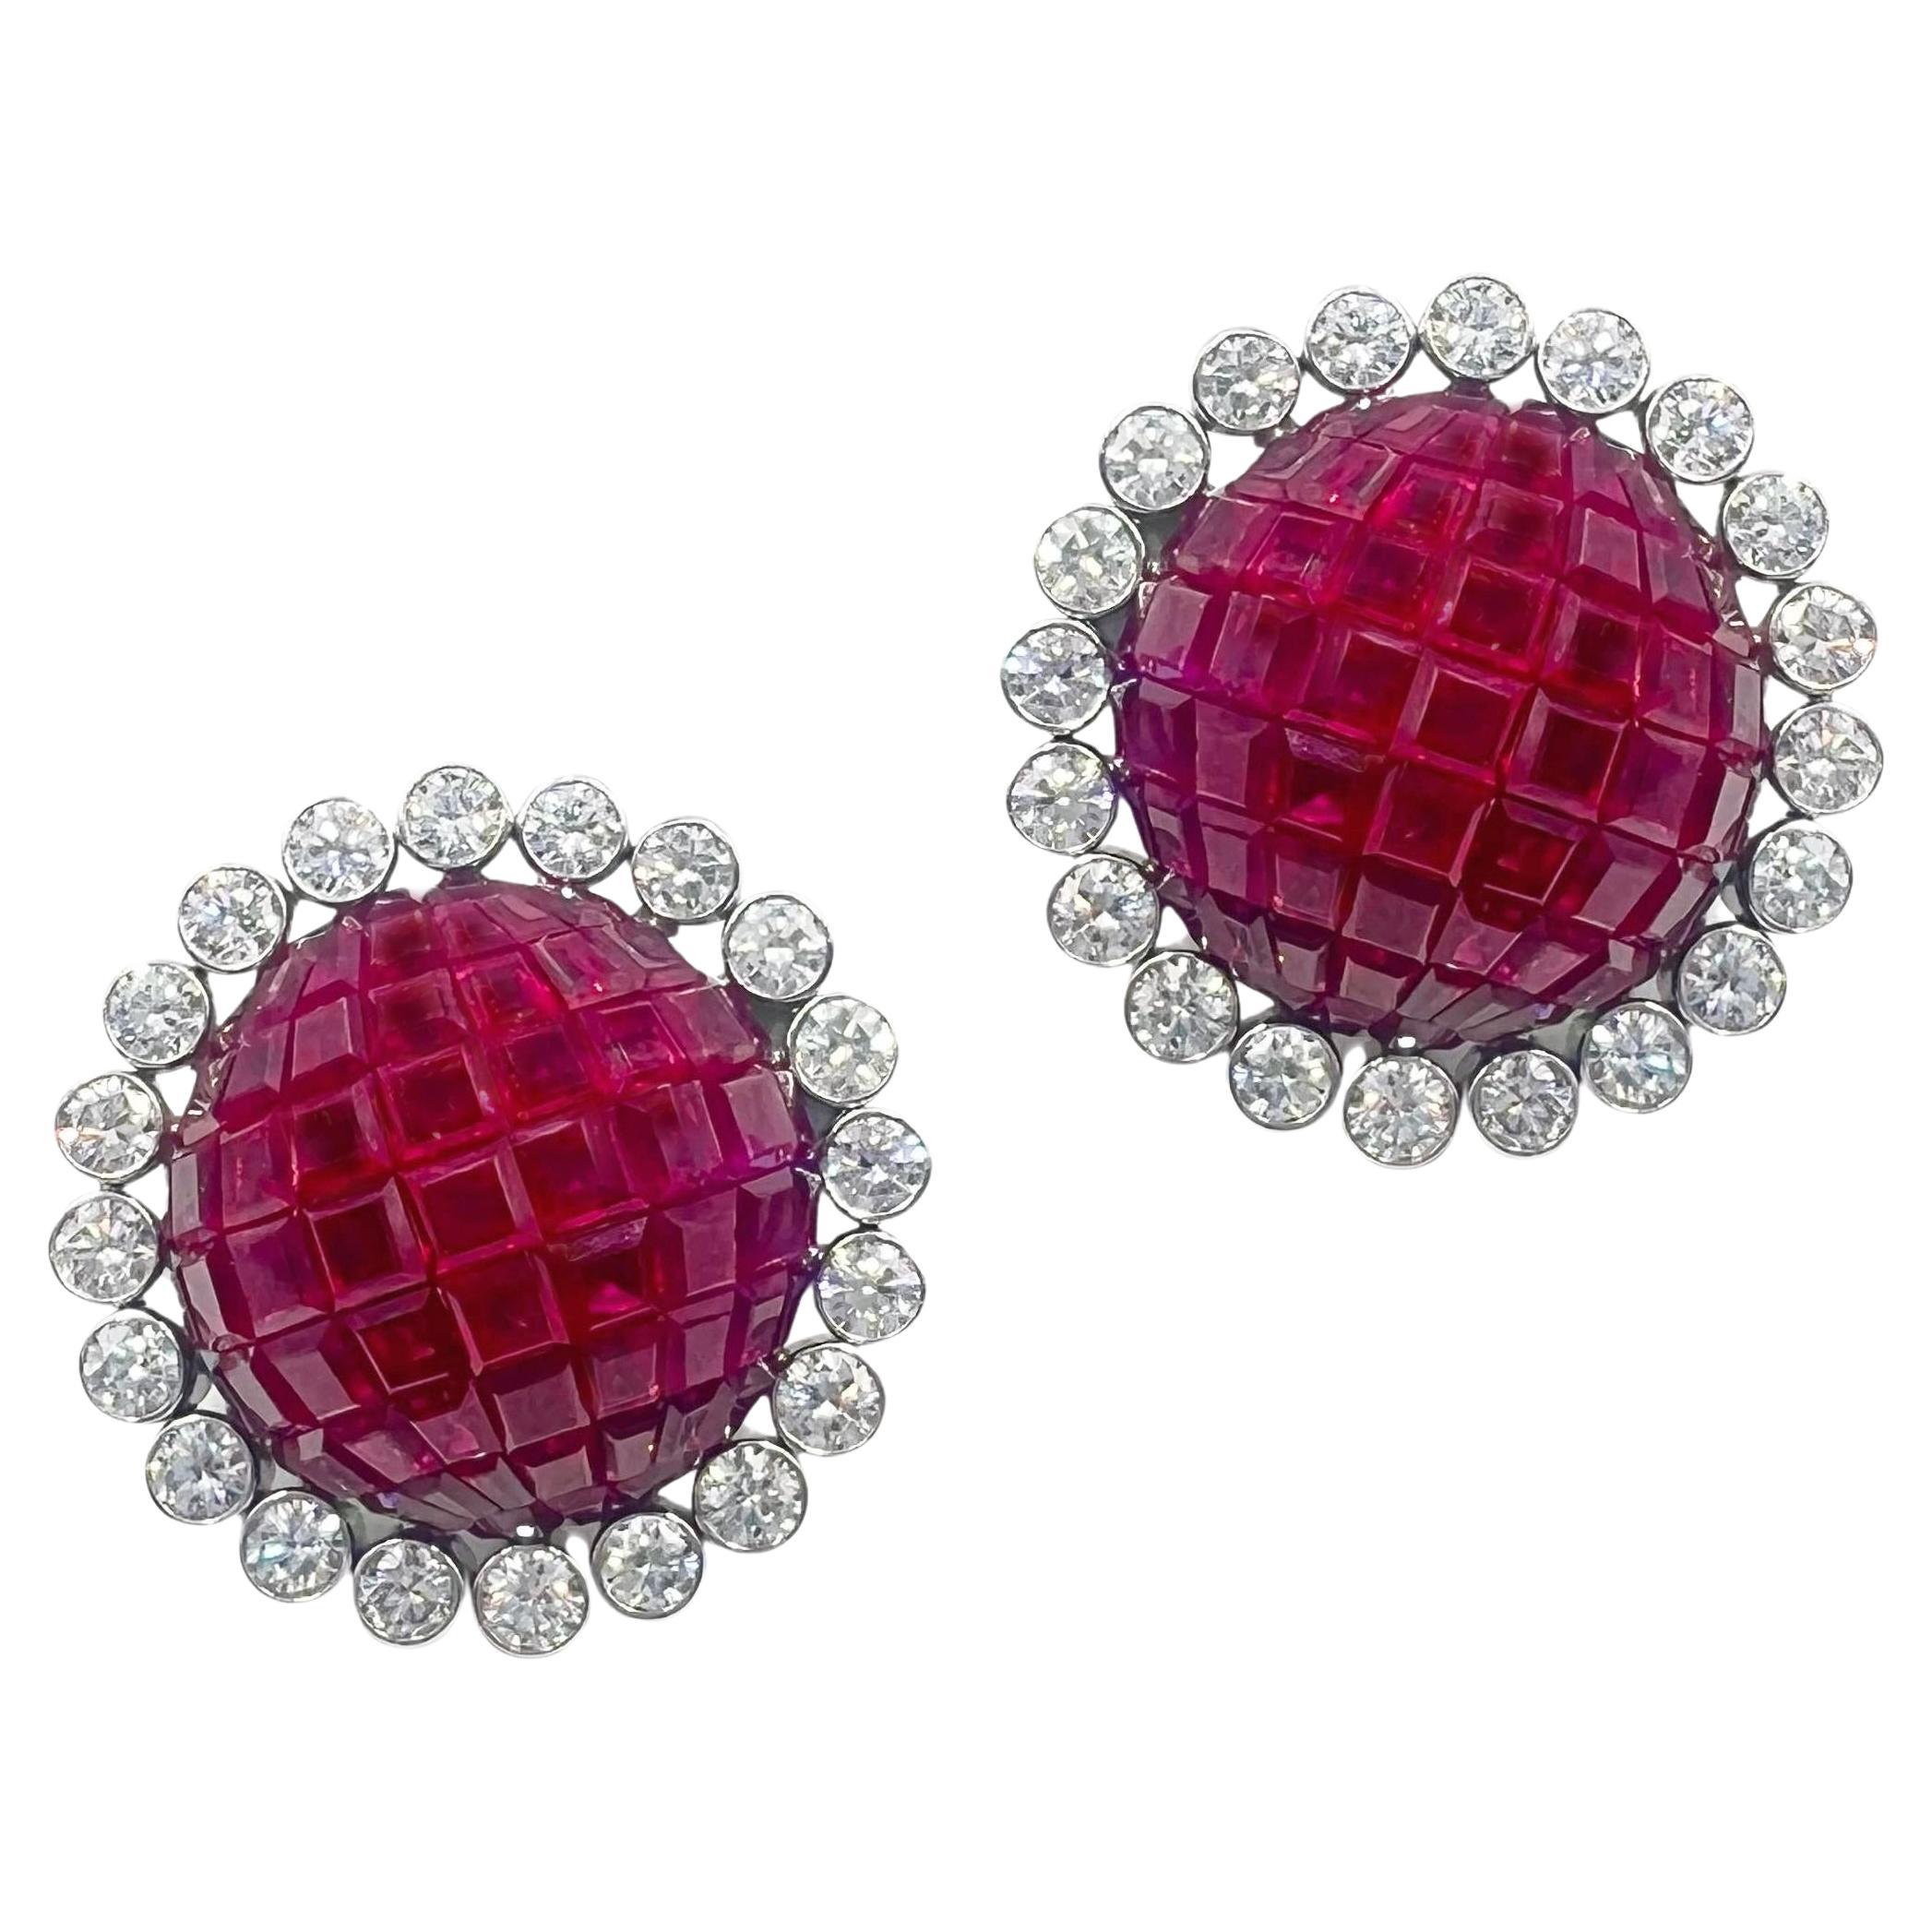 Aletto Brothers Invisibly-Set Ruby Diamond Earrings